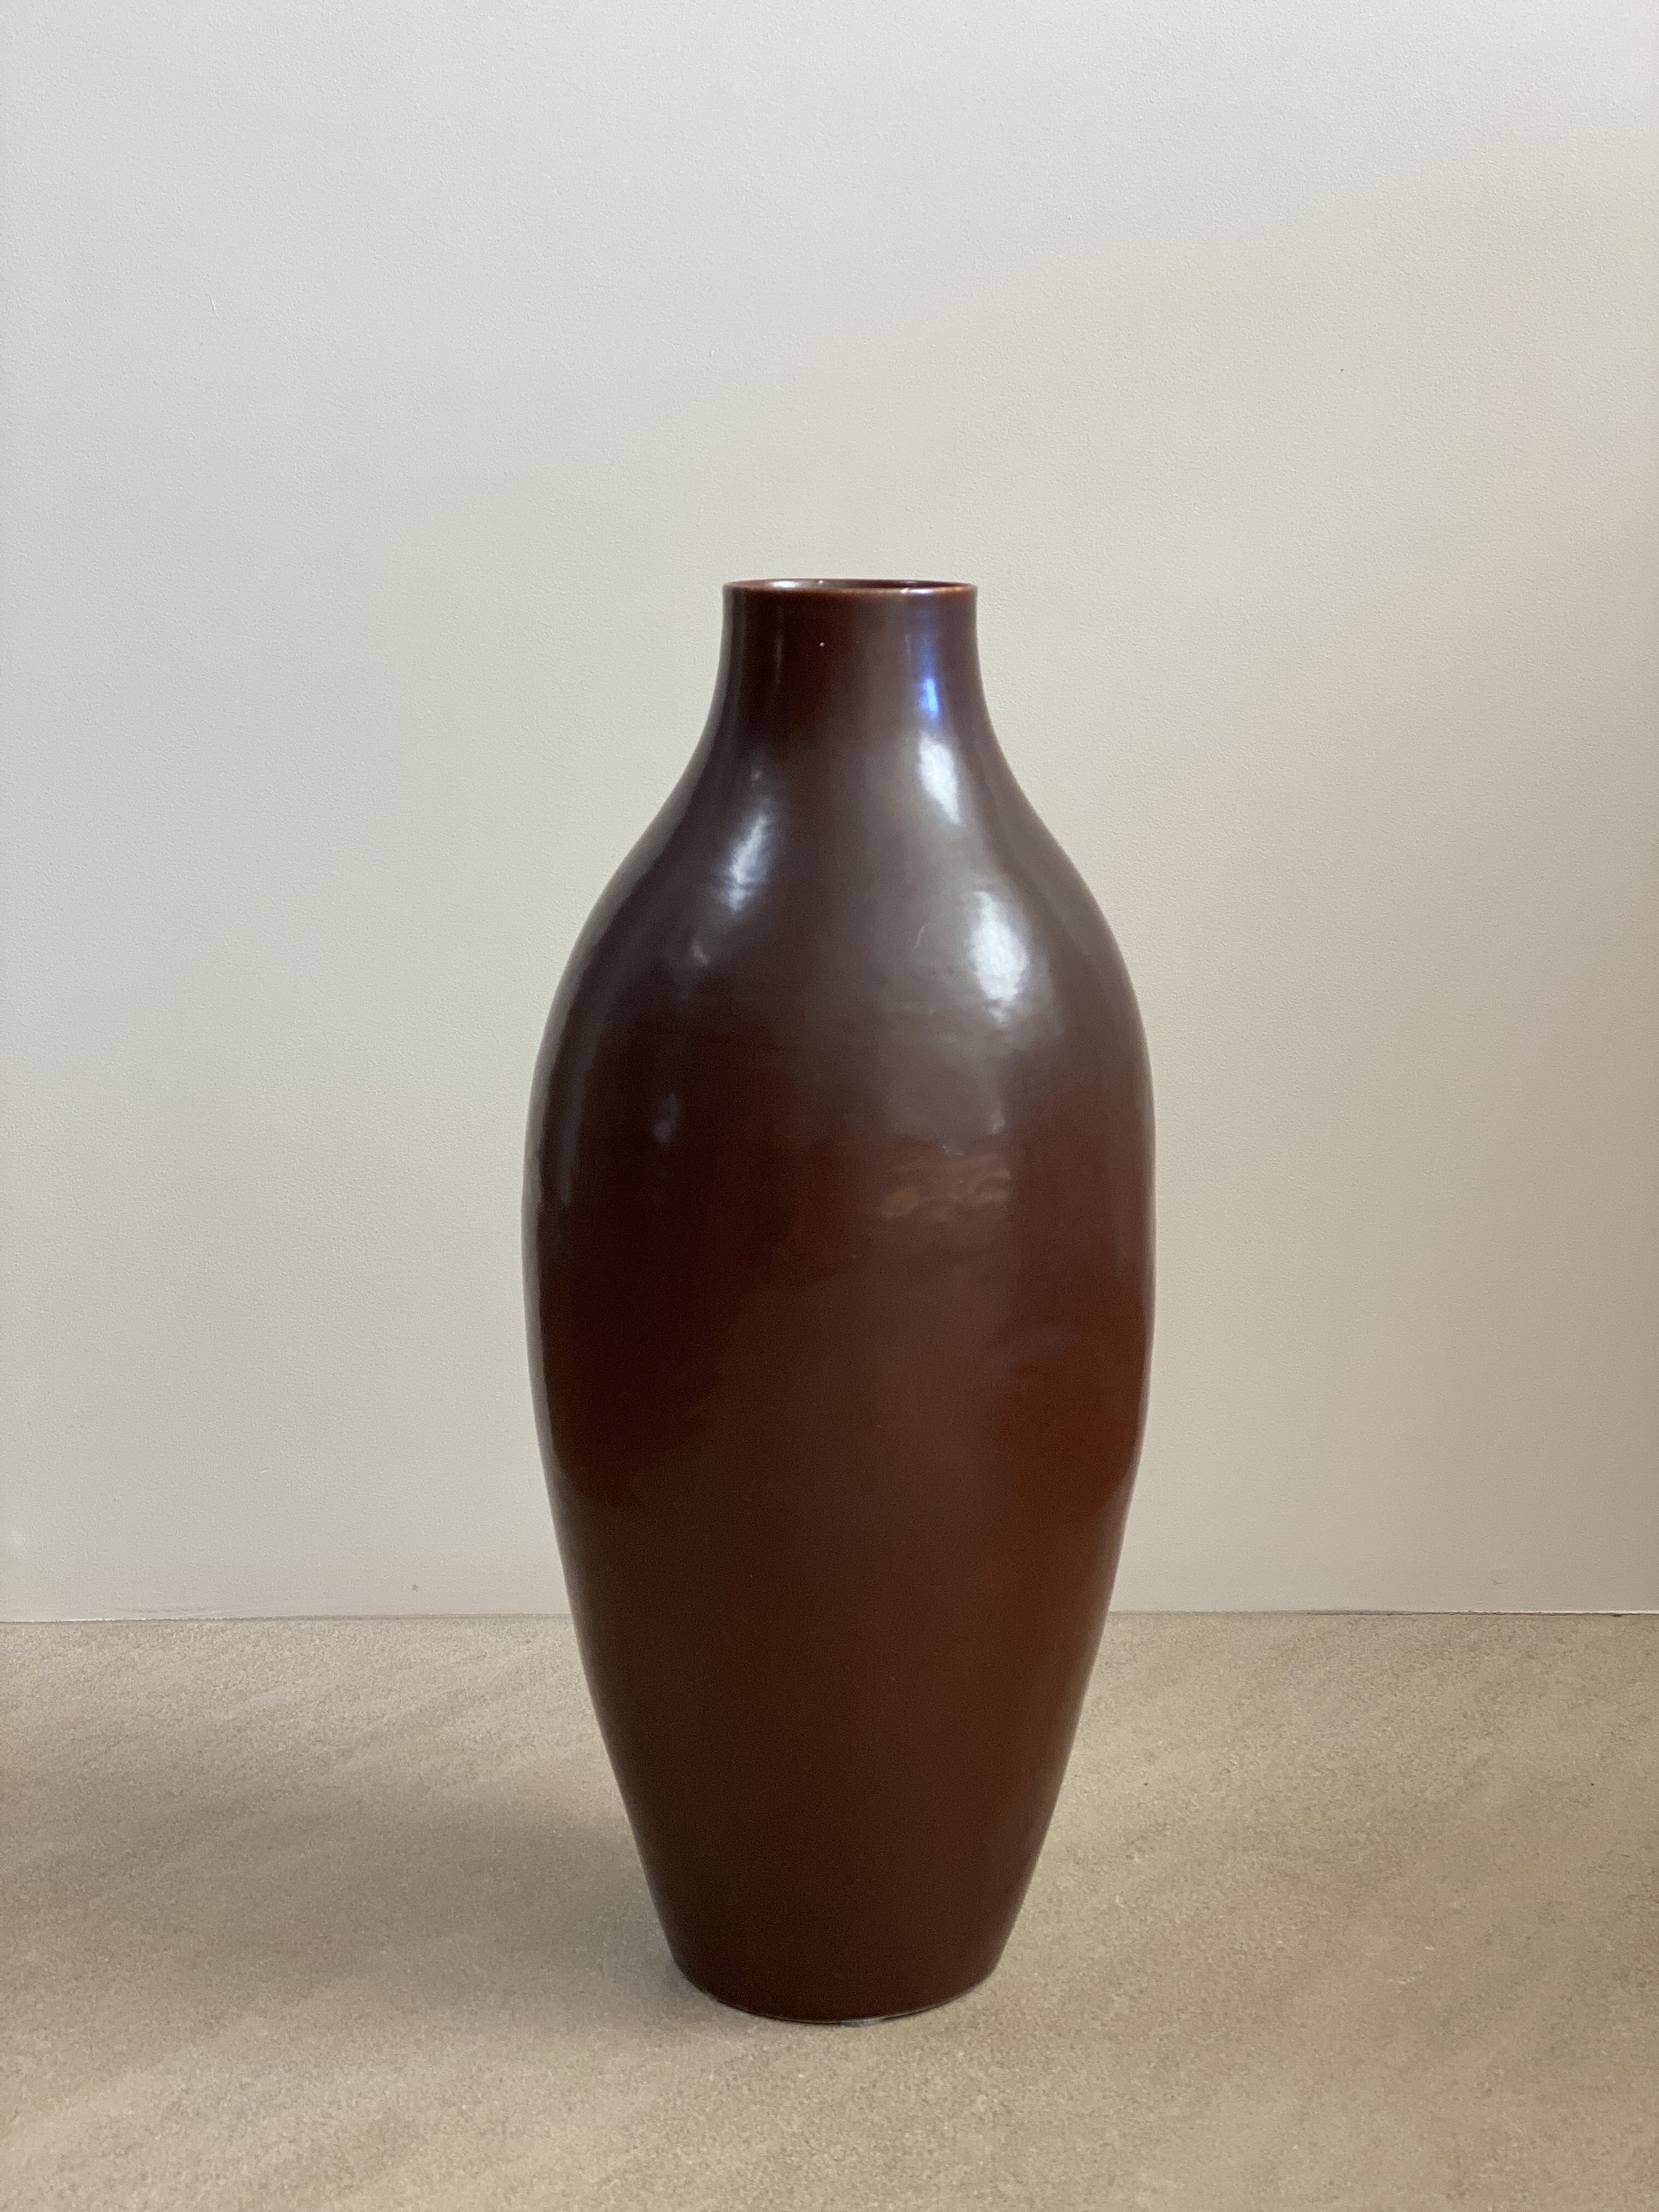 Blue and Black Pottery Vase 6 inches by 4 and a half inches